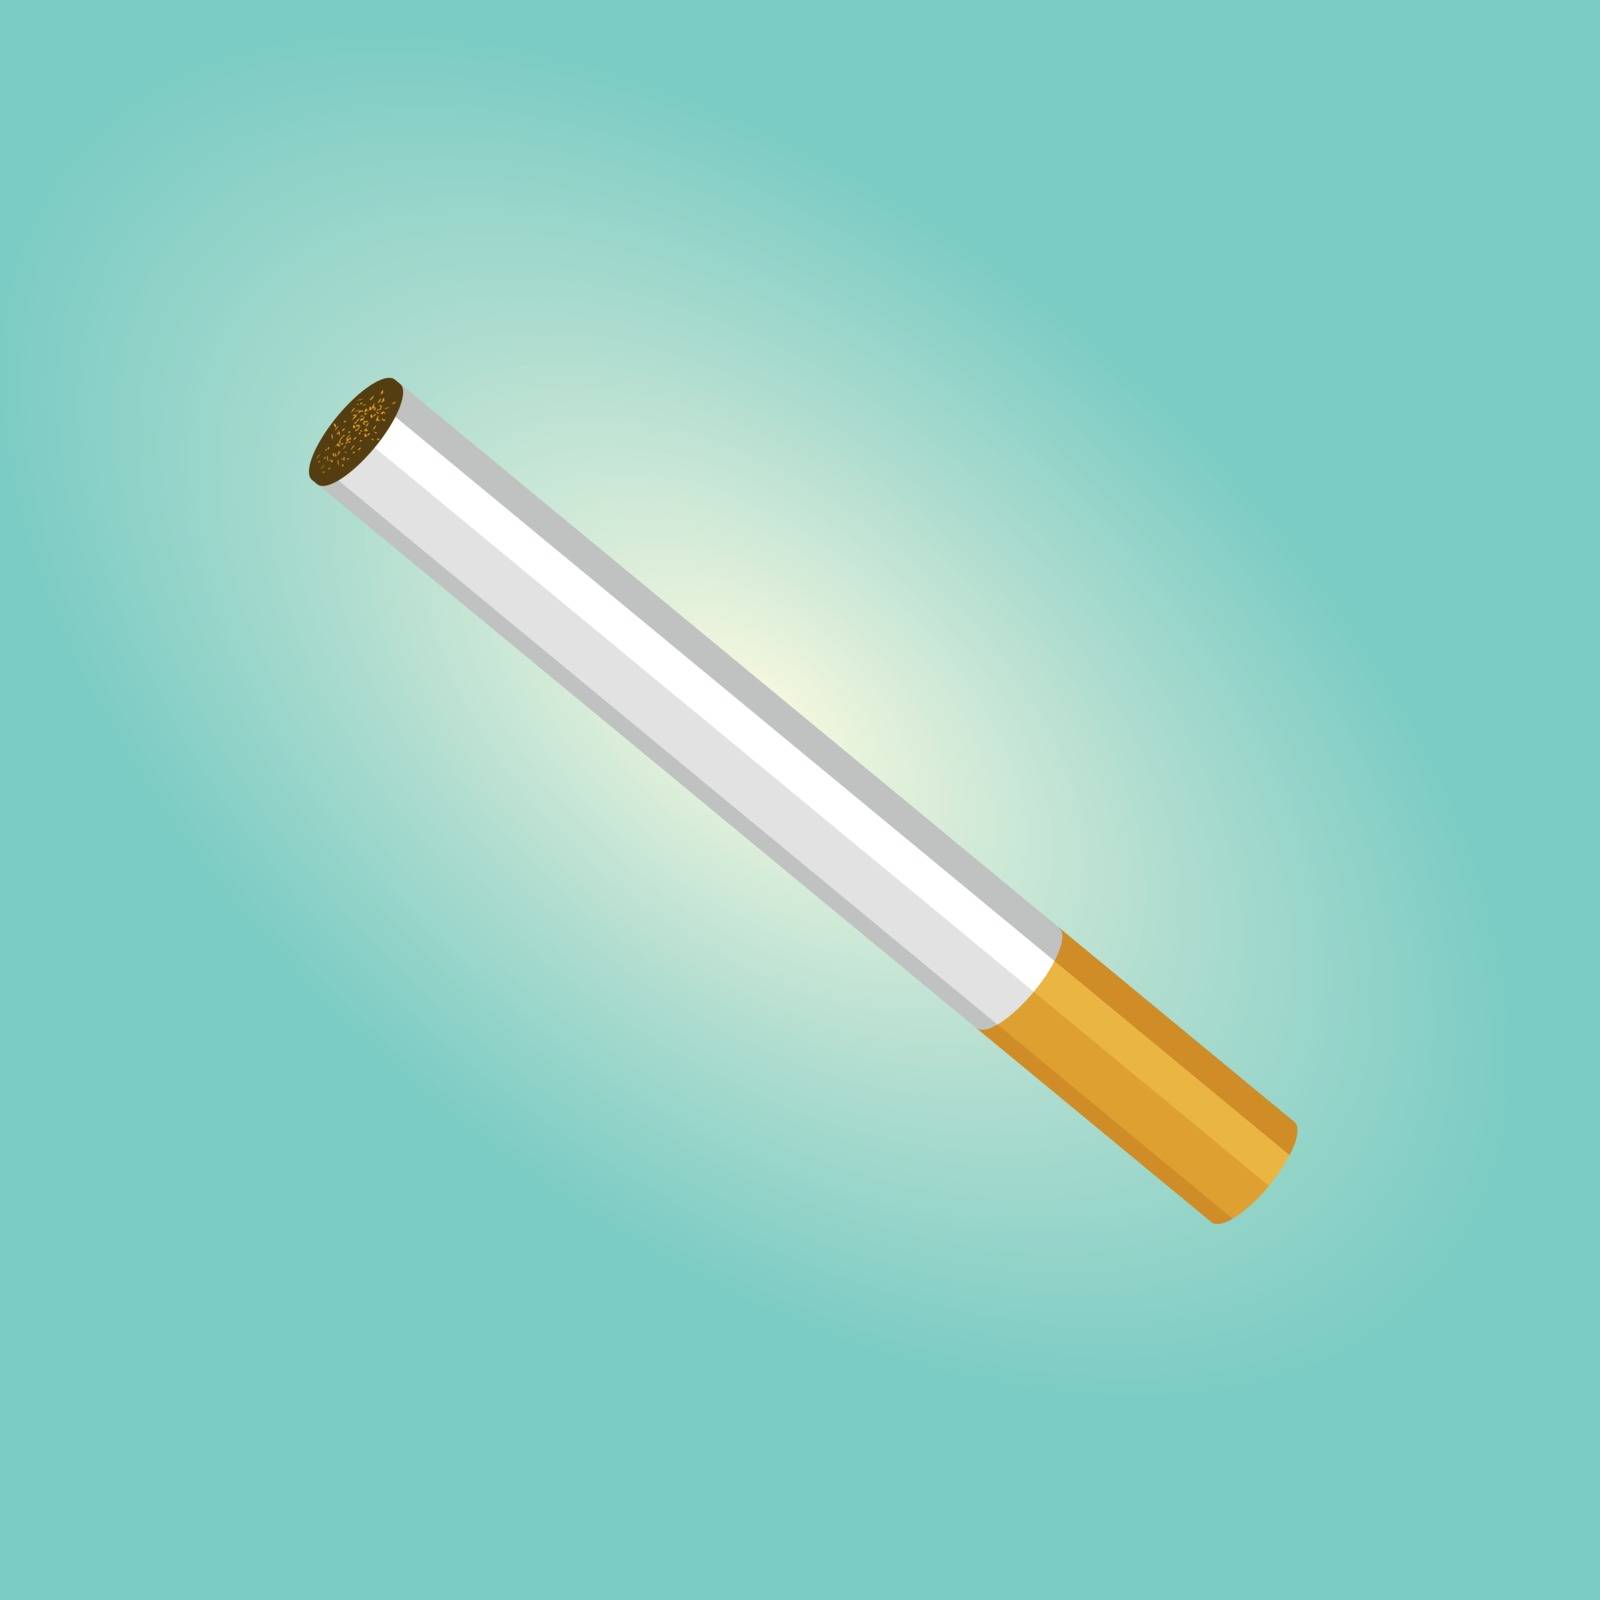 A cigarette by Bwise